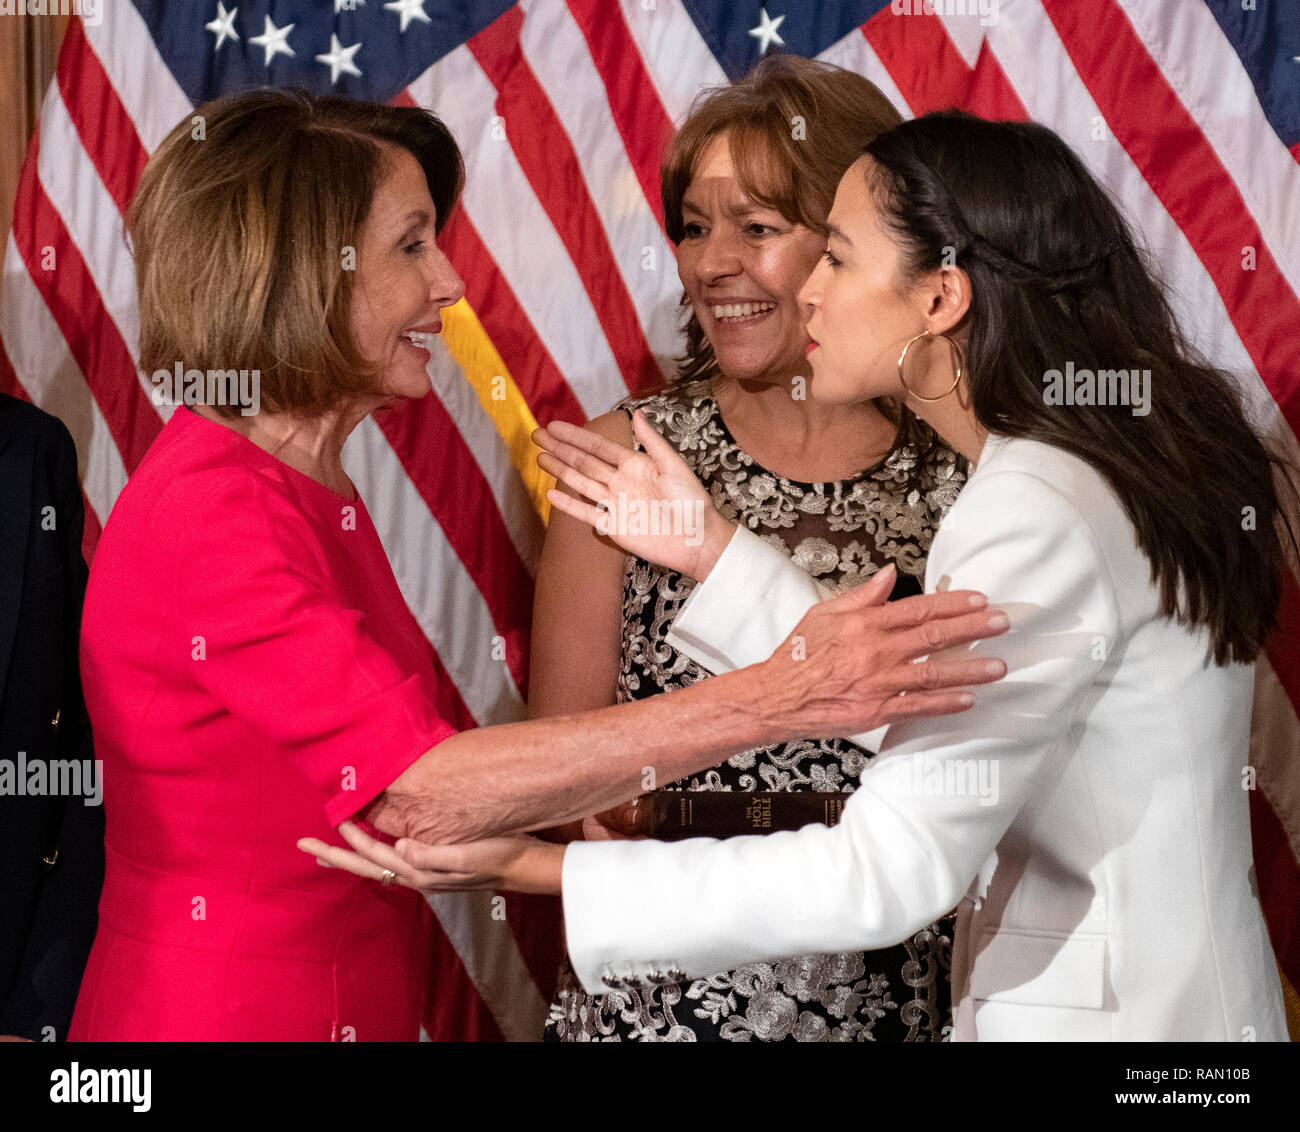 Washington, United States Of America. 03rd Jan, 2019. United States Representative Alexandria Ocasio-Cortez (Democrat of New York) prepares to hug Speaker of the US House of Representatives Nancy Pelosi (Democrat of California) after posing for a mock swearing-in photo with members of her family as the 116th Congress convenes for its opening session in the US Capitol in Washington, DC on Thursday, January 3, 2019. Credit: Ron Sachs/CNP (RESTRICTION: NO New York or New Jersey Newspapers or newspapers within a 75 mile radius of New York City) | usage worldwide Credit: dpa/Alamy Live News Stock Photo